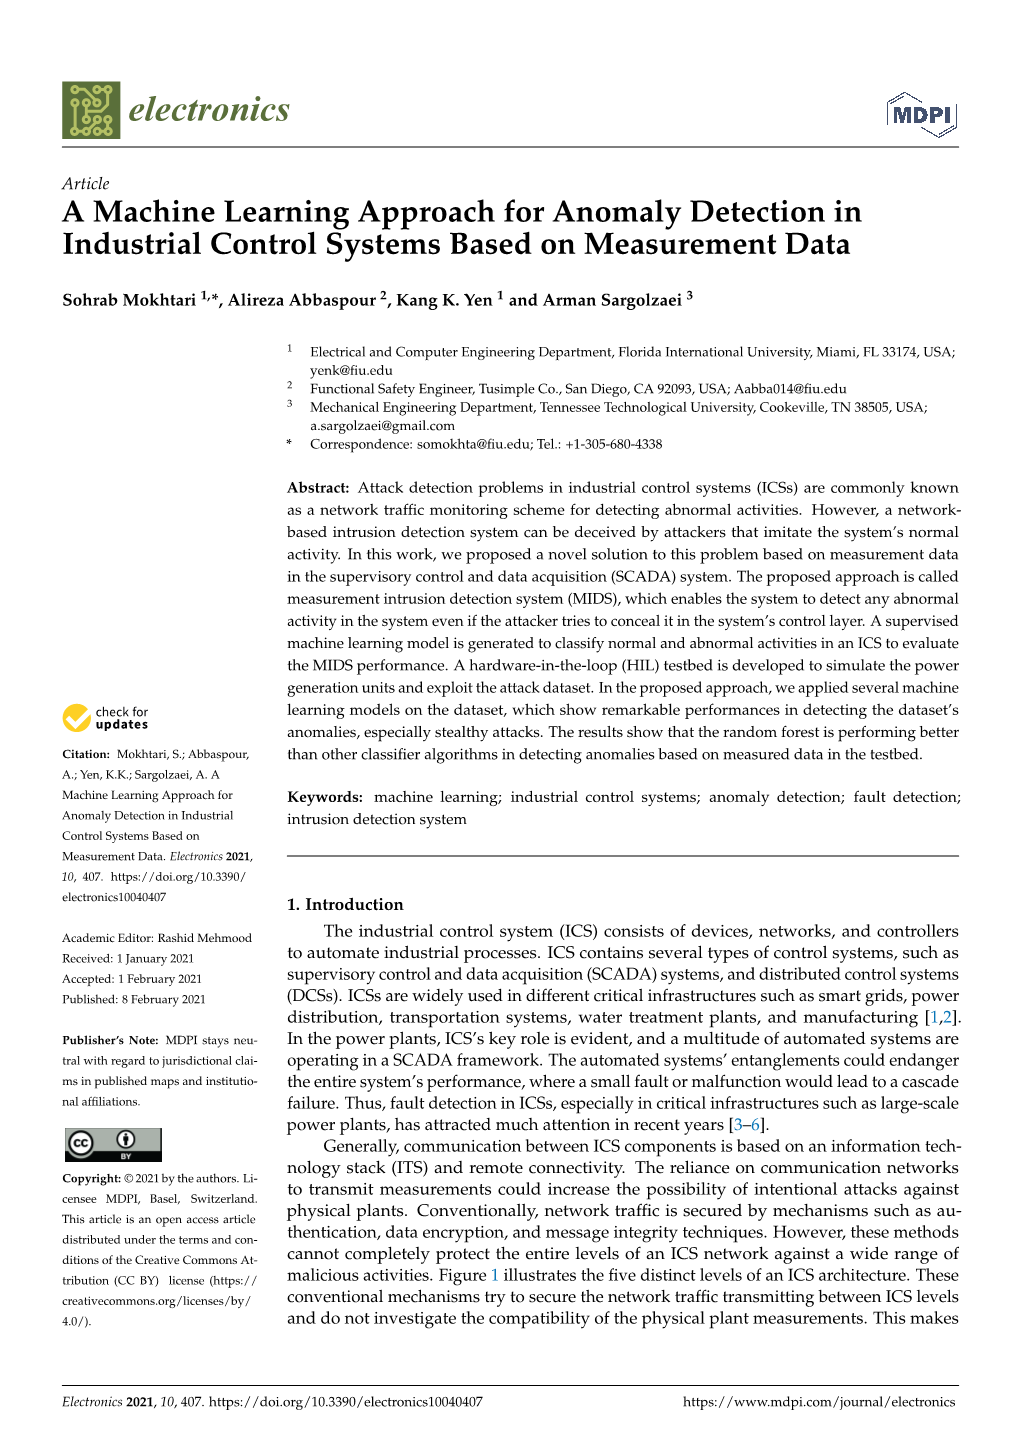 A Machine Learning Approach for Anomaly Detection in Industrial Control Systems Based on Measurement Data